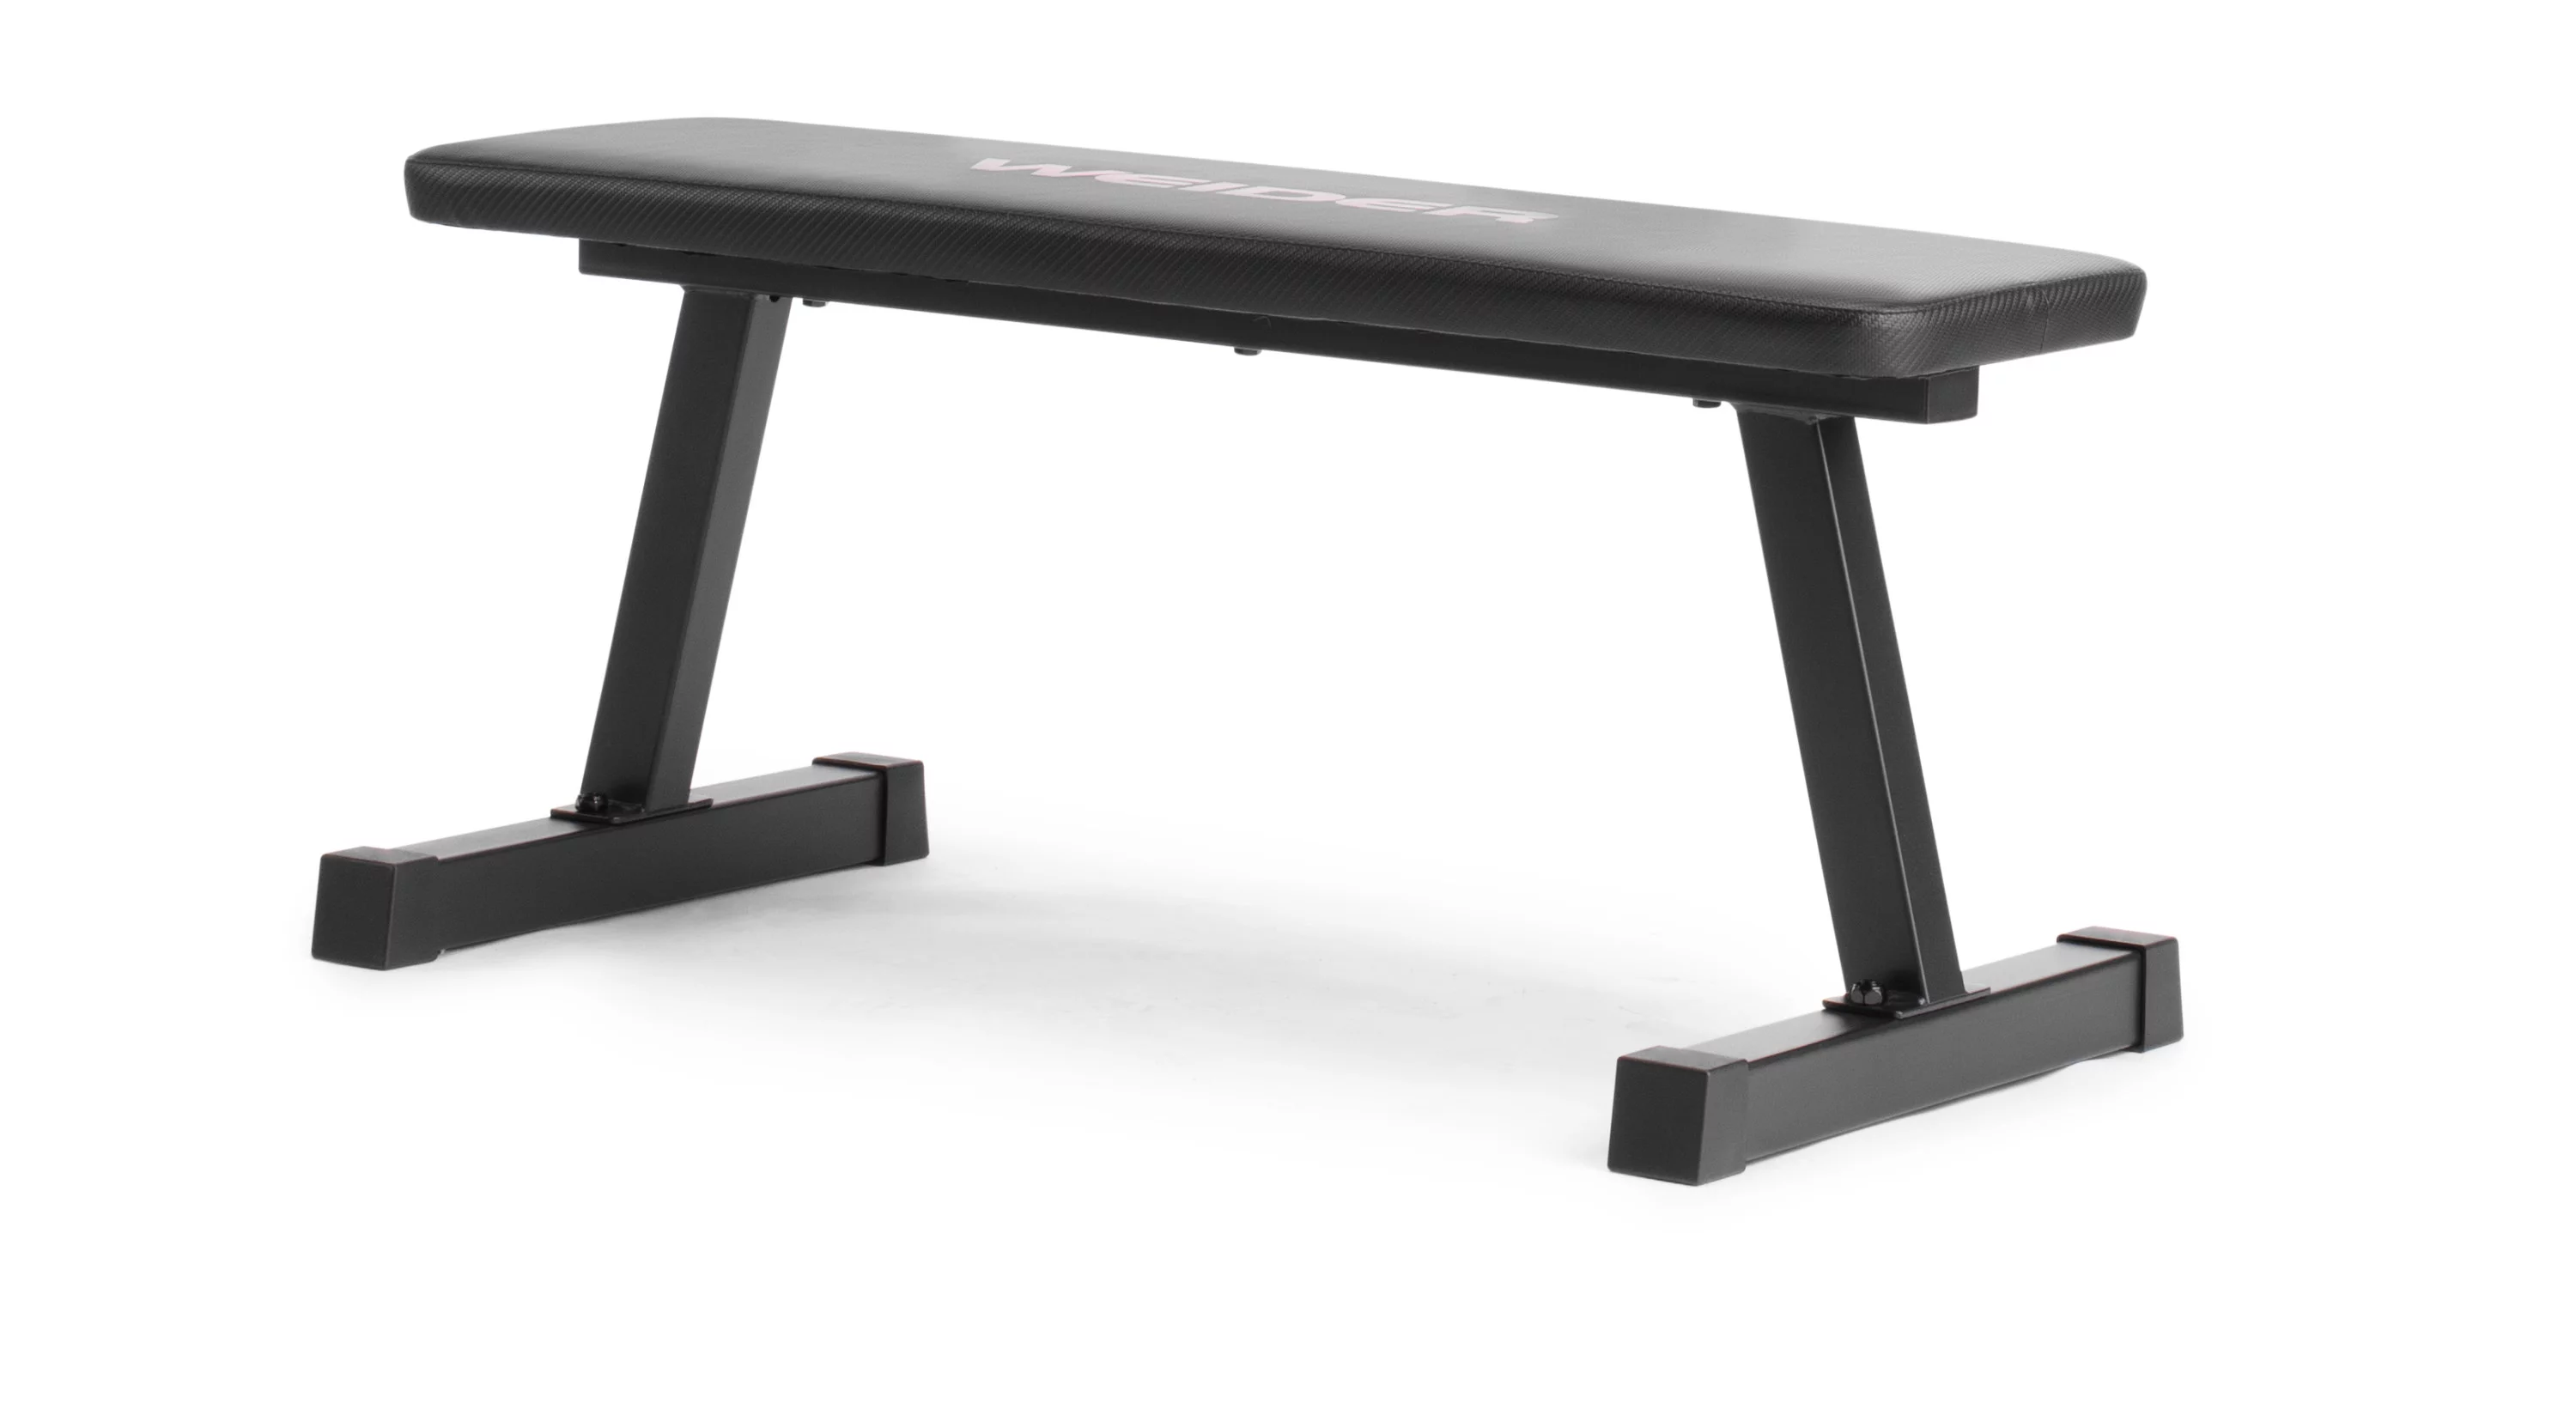 Weider Traditional Flat Bench with a Sewn Vinyl Seat, 460 lb. Weight Limit